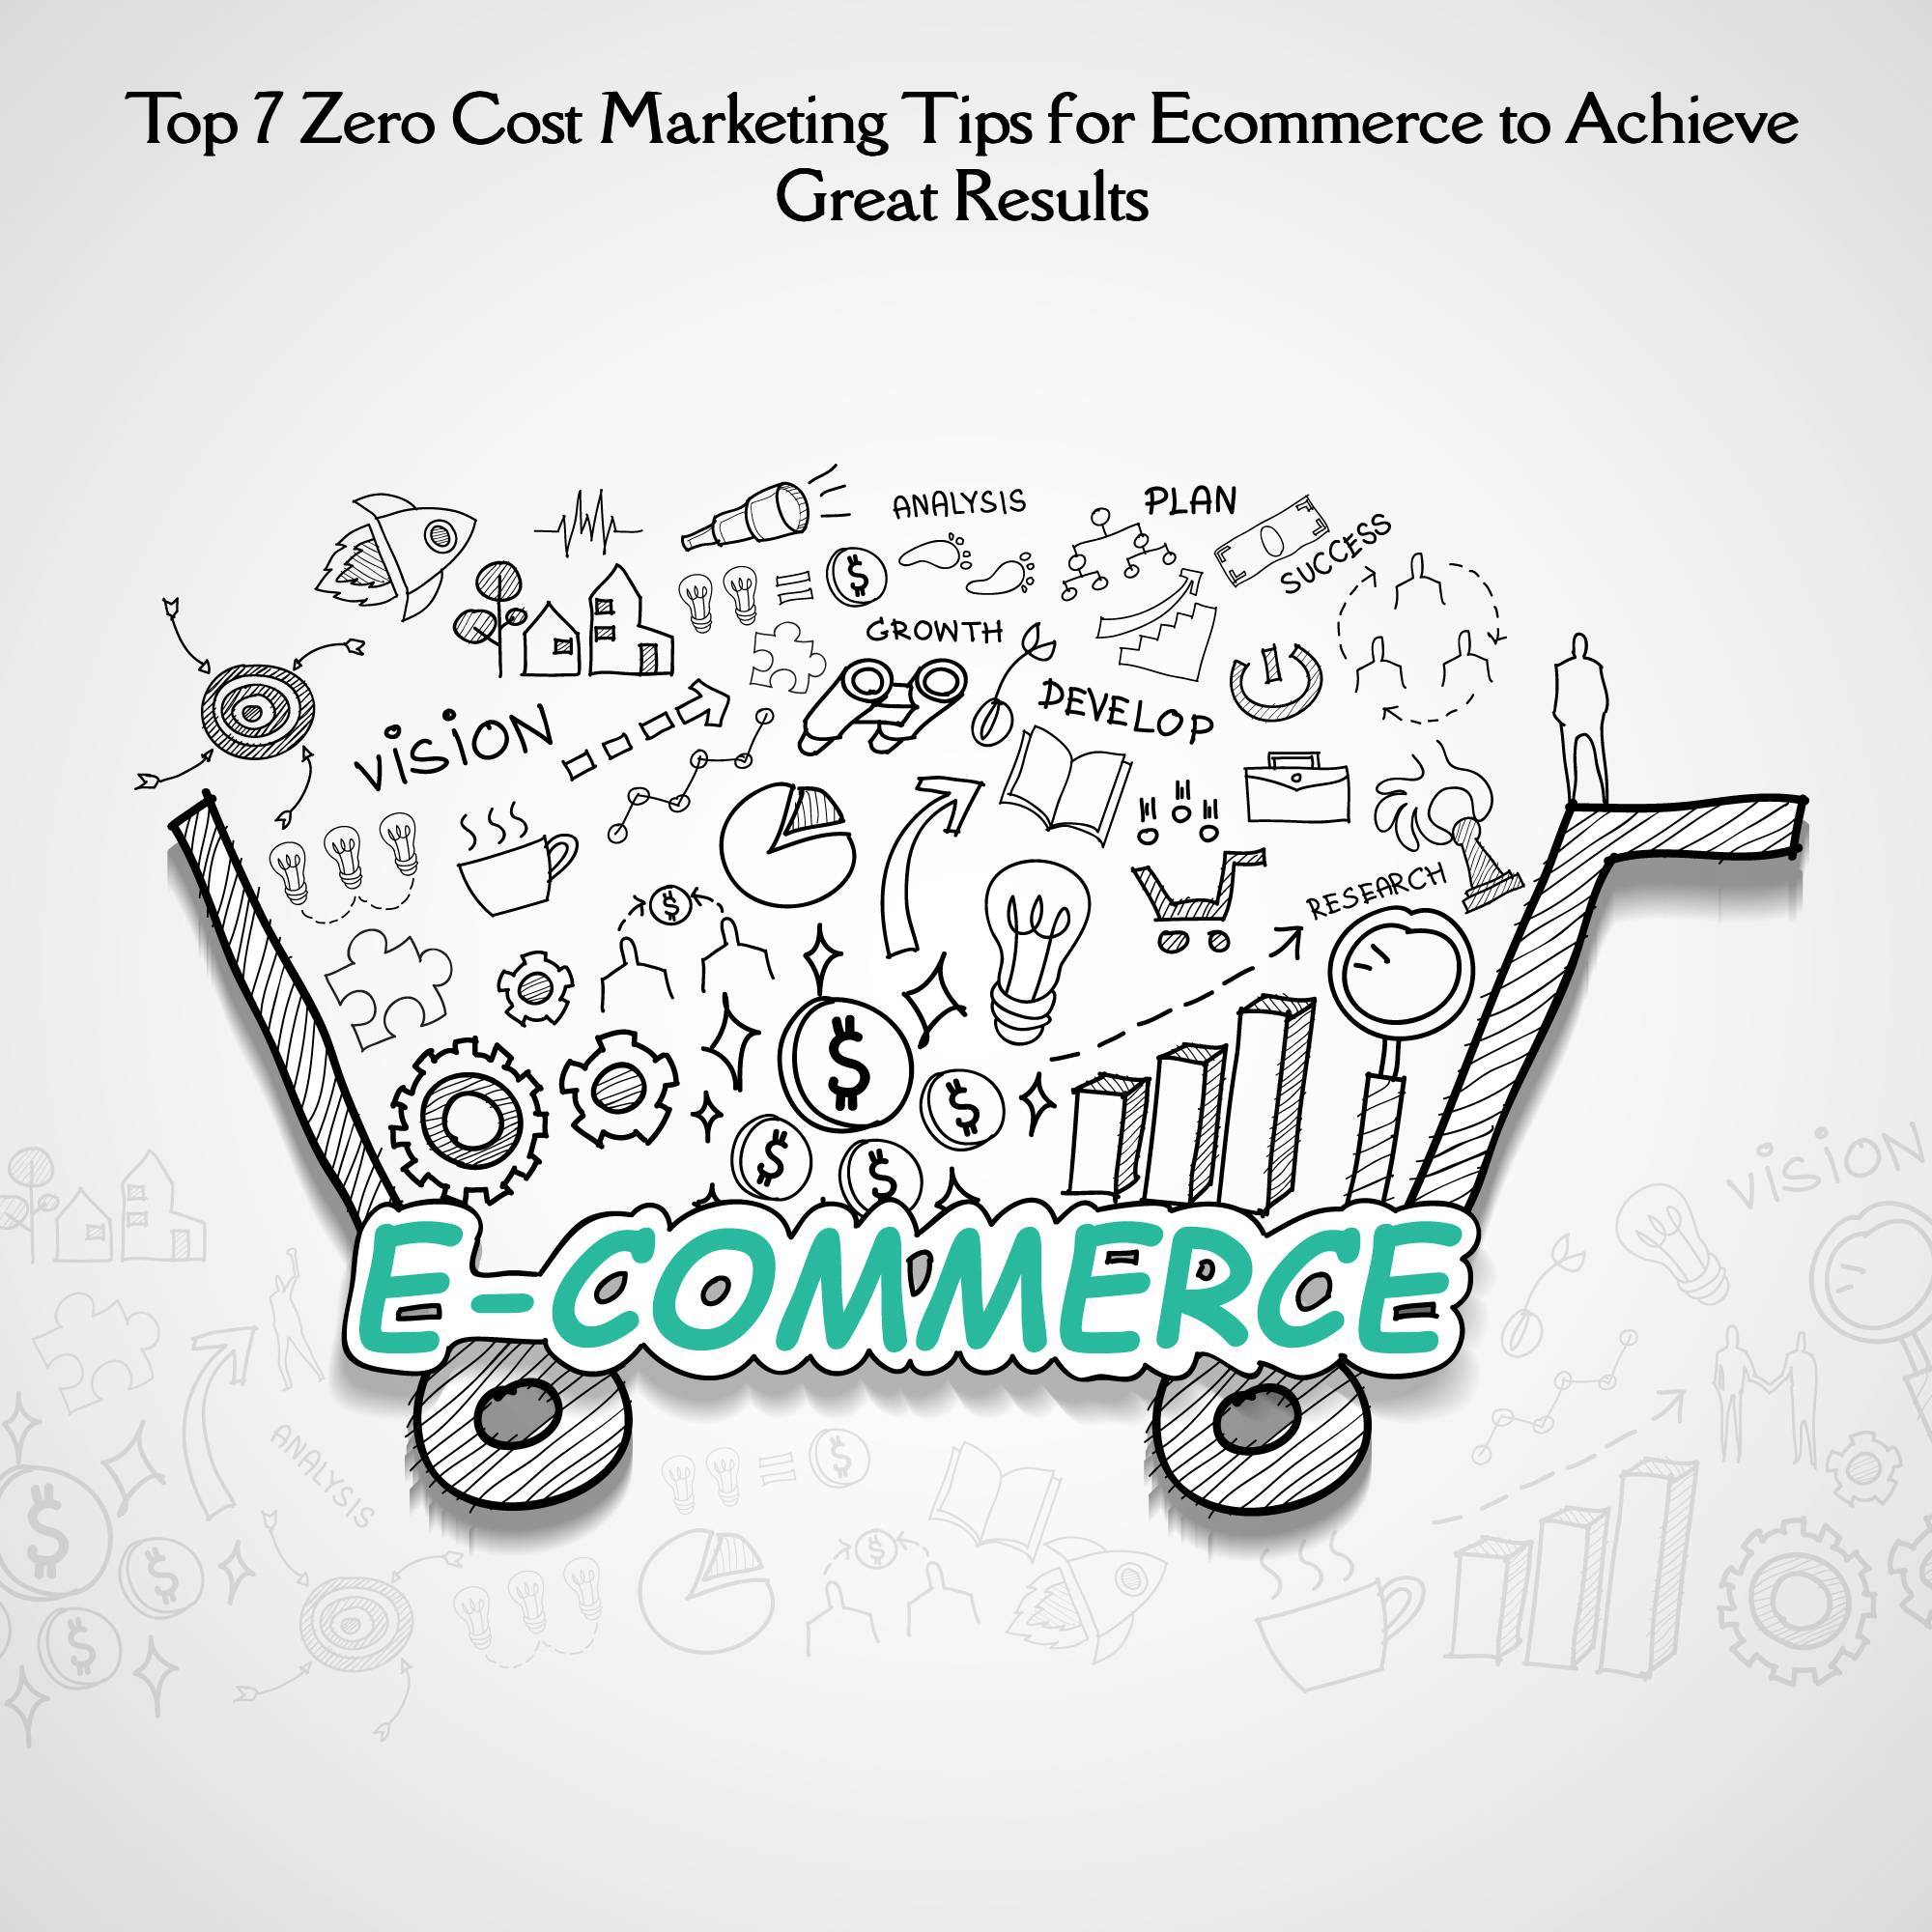 Top 7 Zero Cost Marketing Tips for Ecommerce to Achieve Great Results